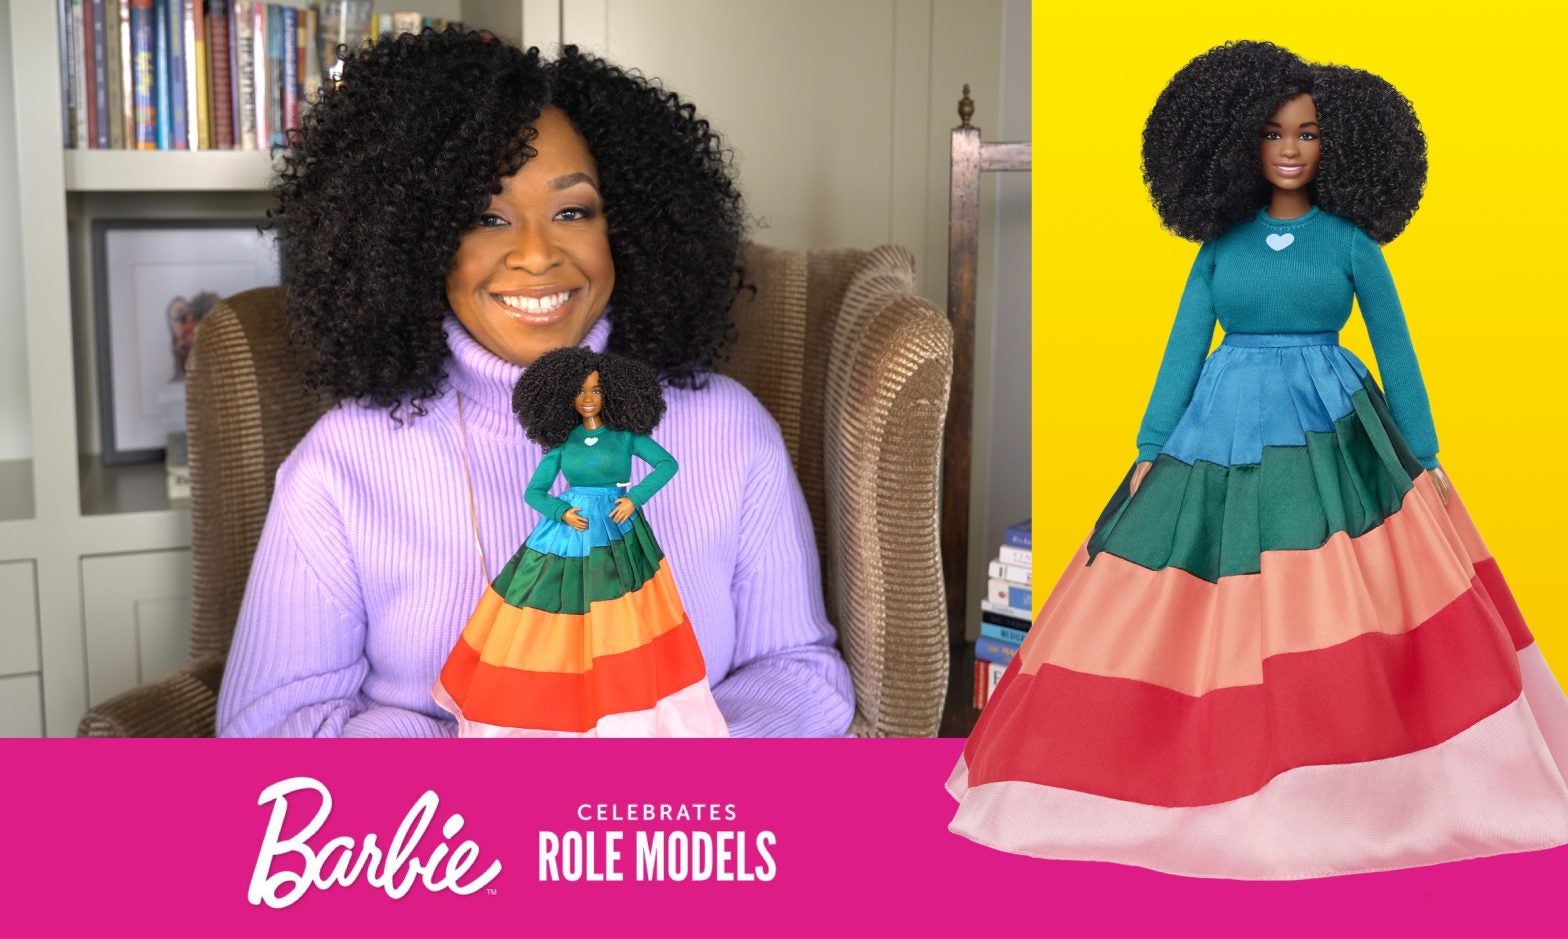 Shonda Rhimes On Her 'Mind-Blowing' Barbie Doll And The Key To Her Courage: 'You Belong In Any Room You Are In'